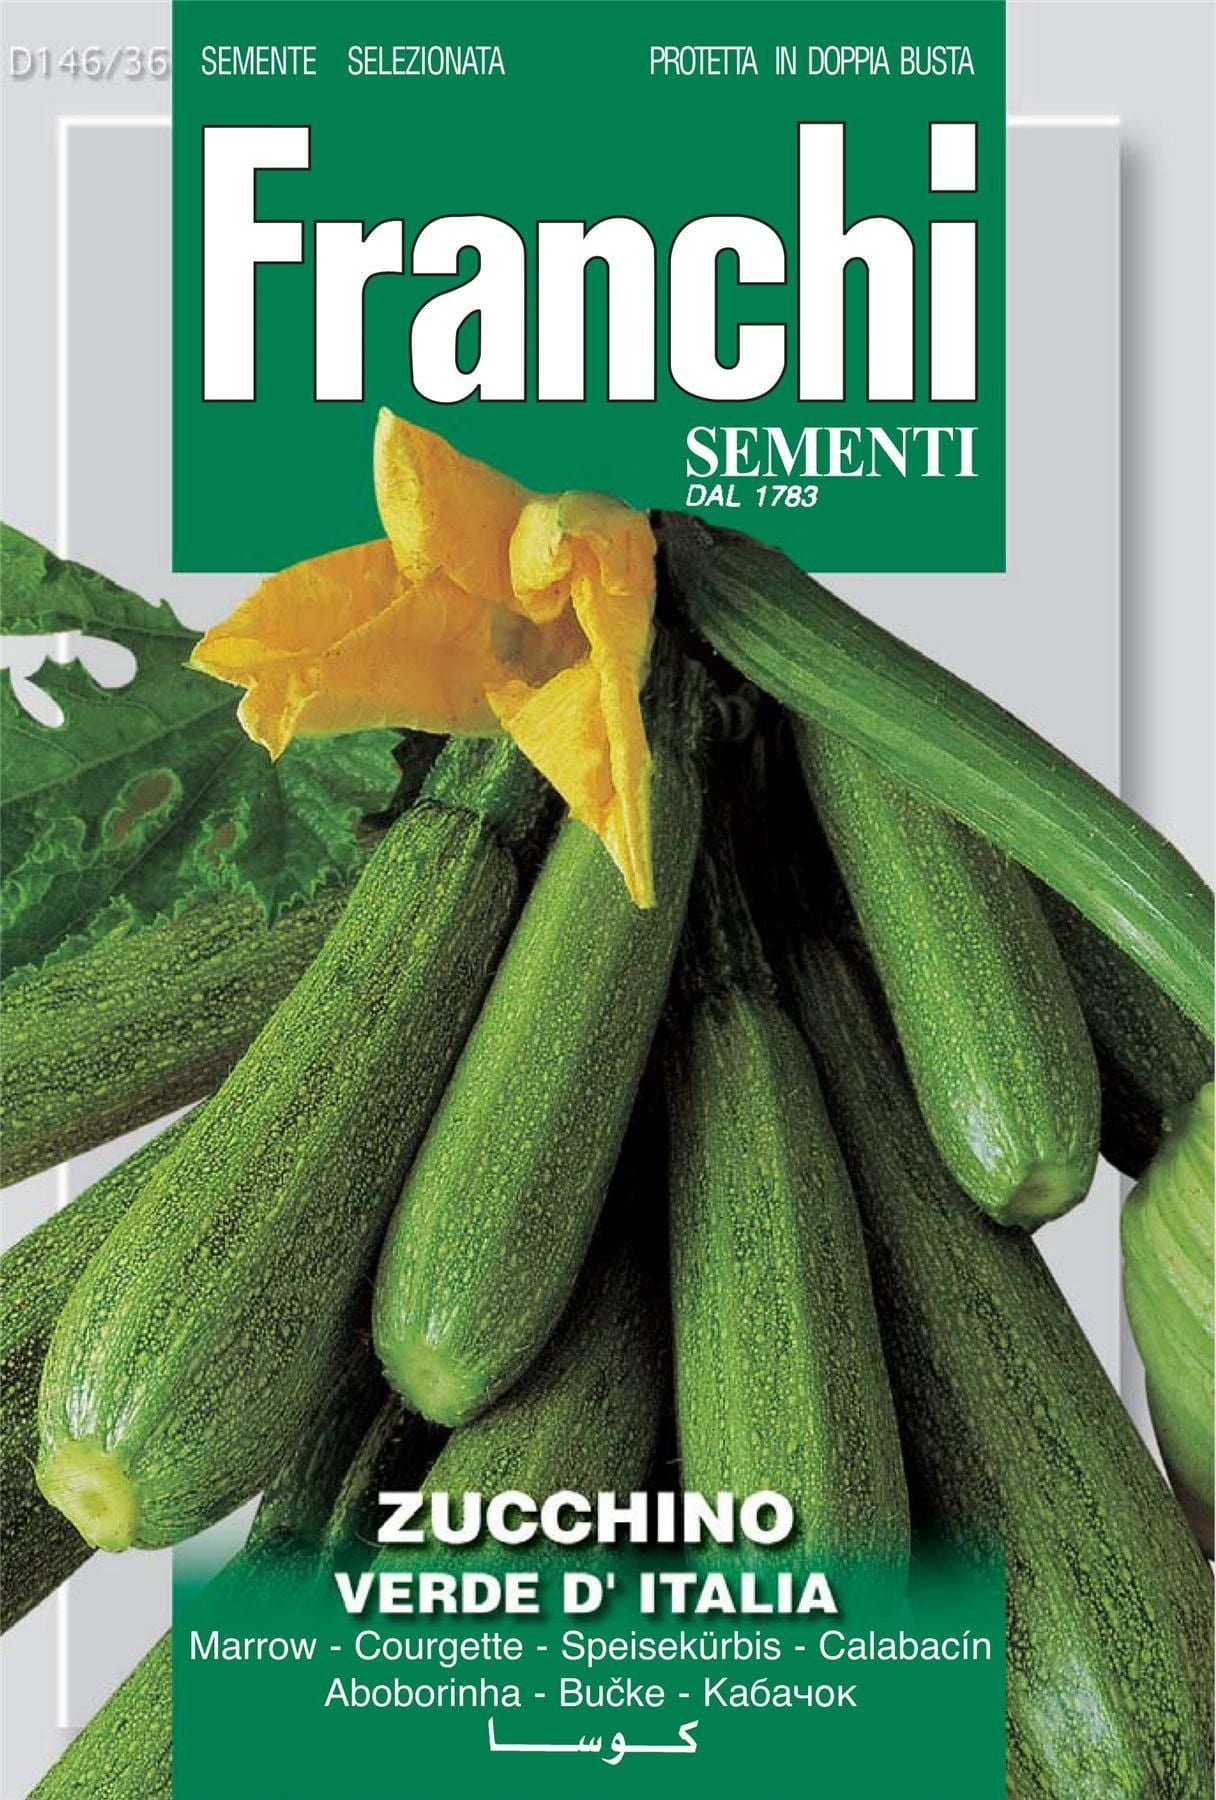 Franchi Seeds of Italy - DBO 146/36 - Courgette - Verde D'Italia - Seeds